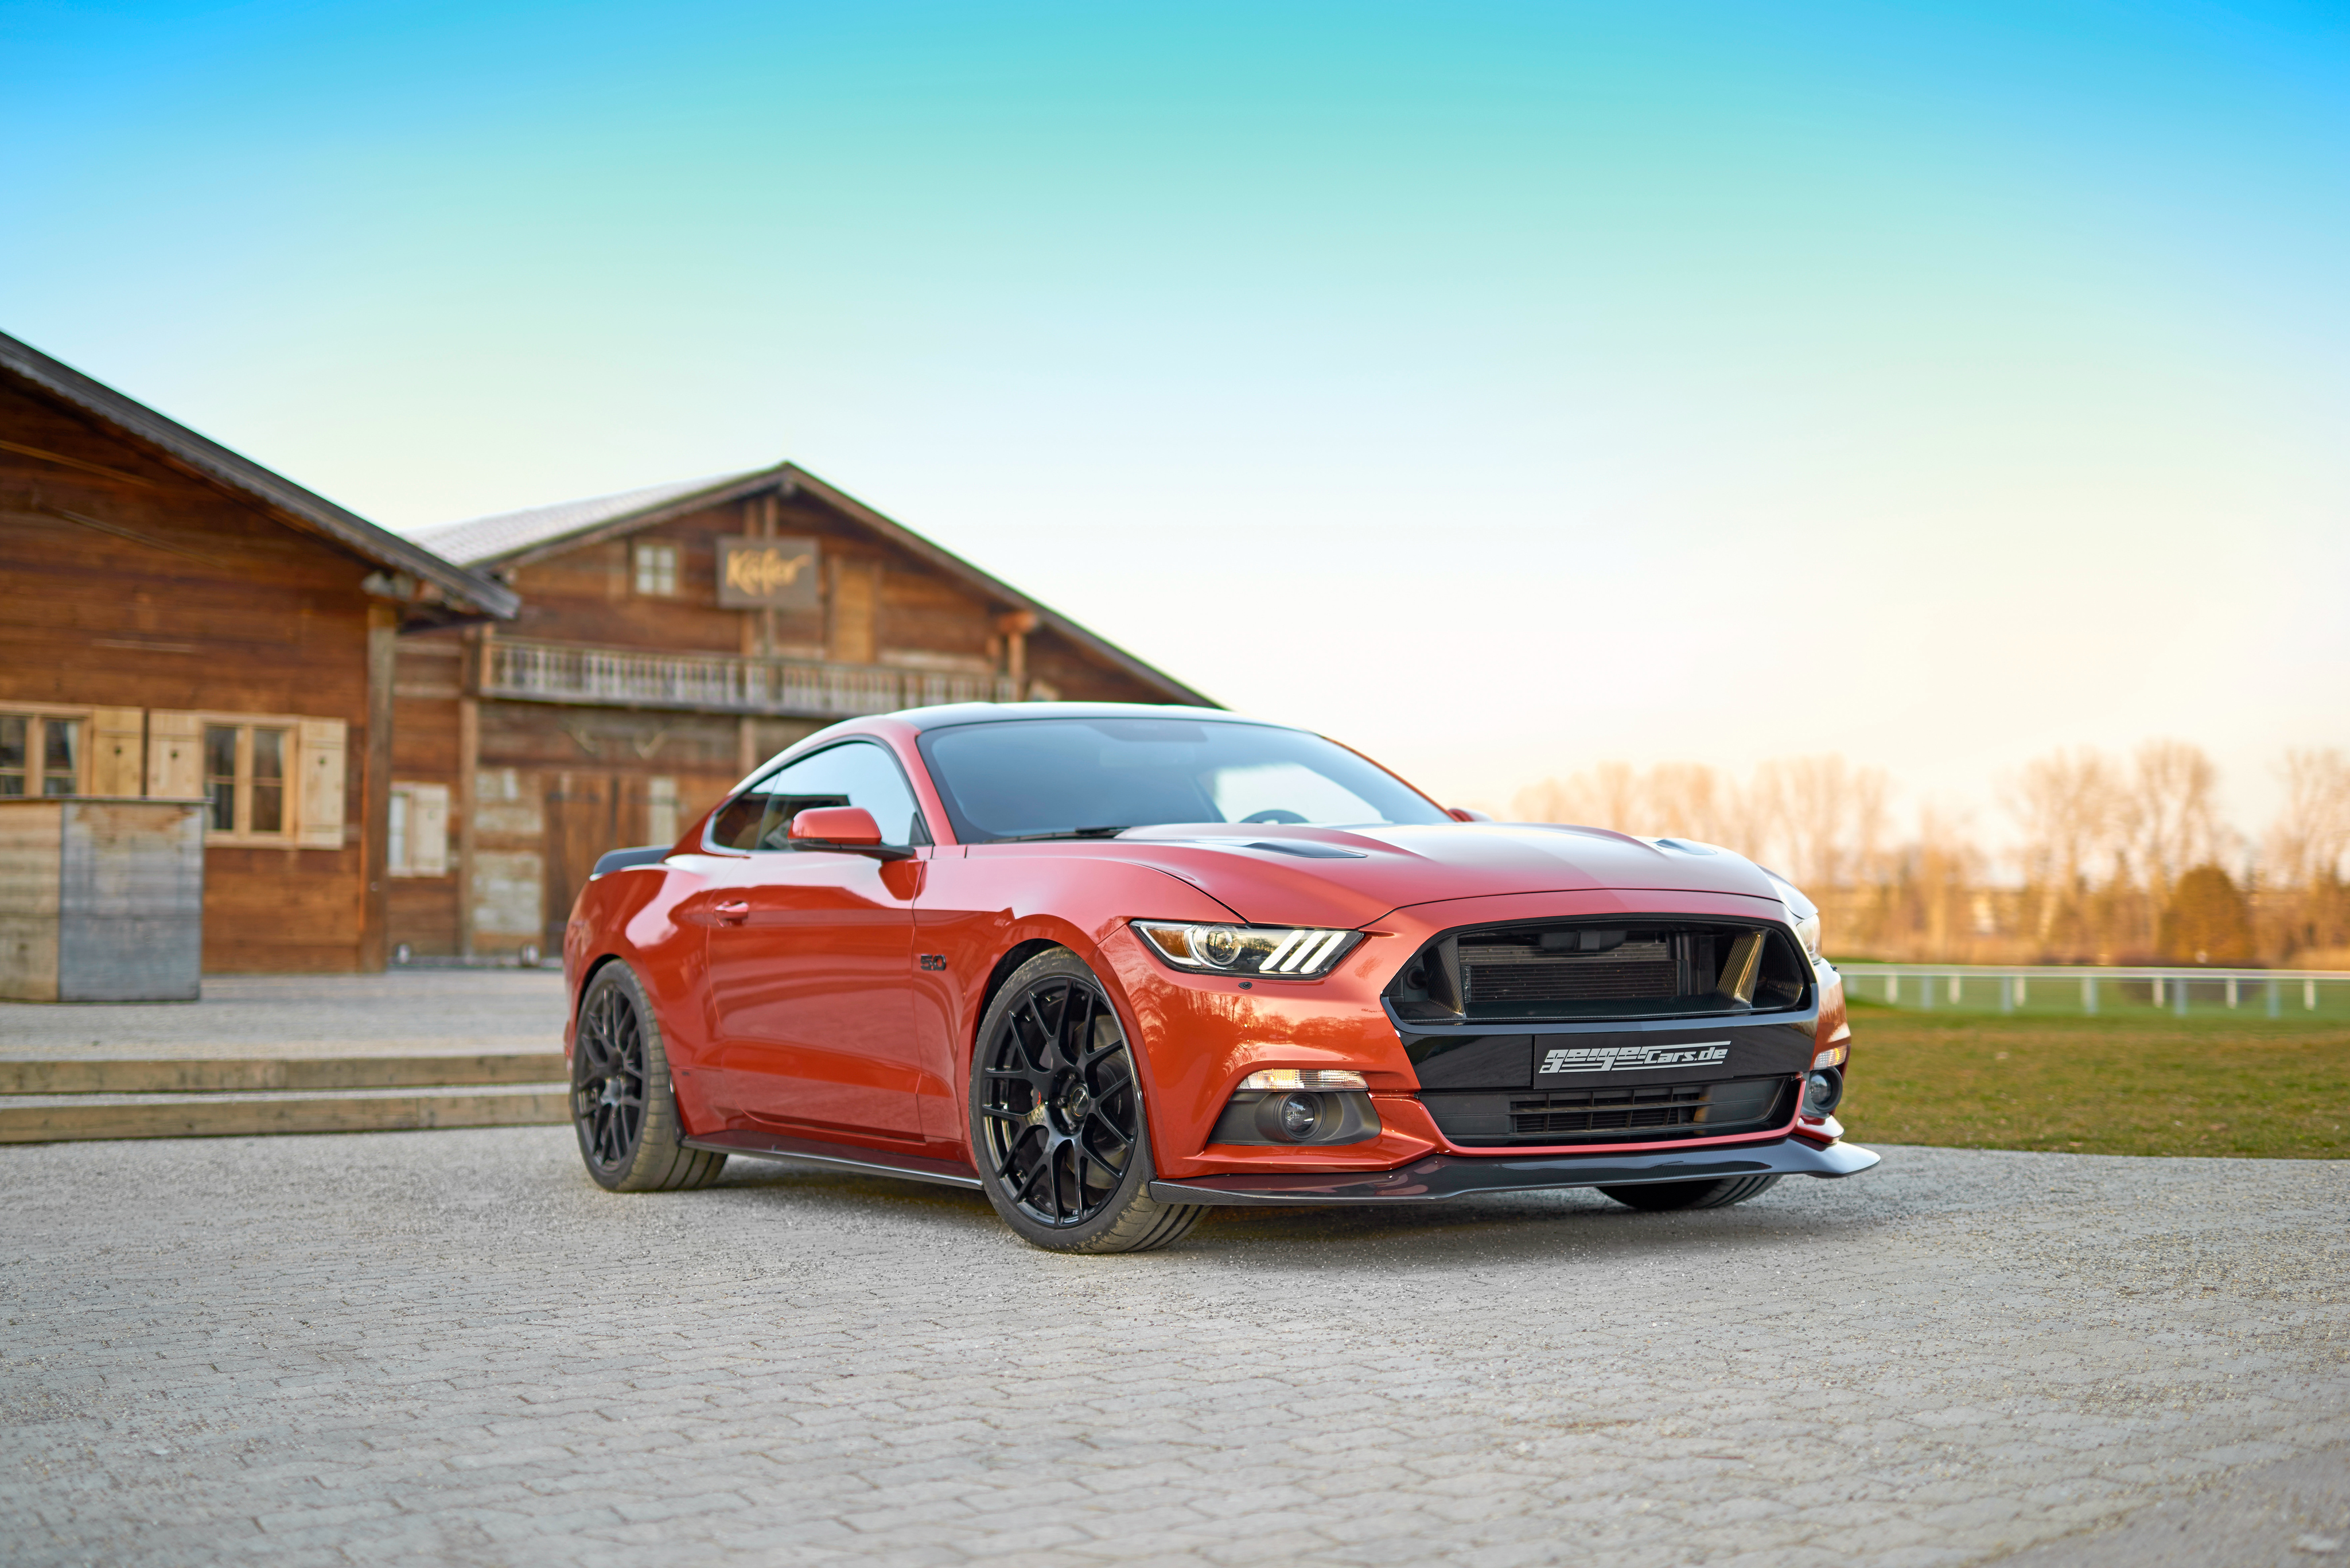 ford mustang, muscle car, vehicles, car, ford, orange car